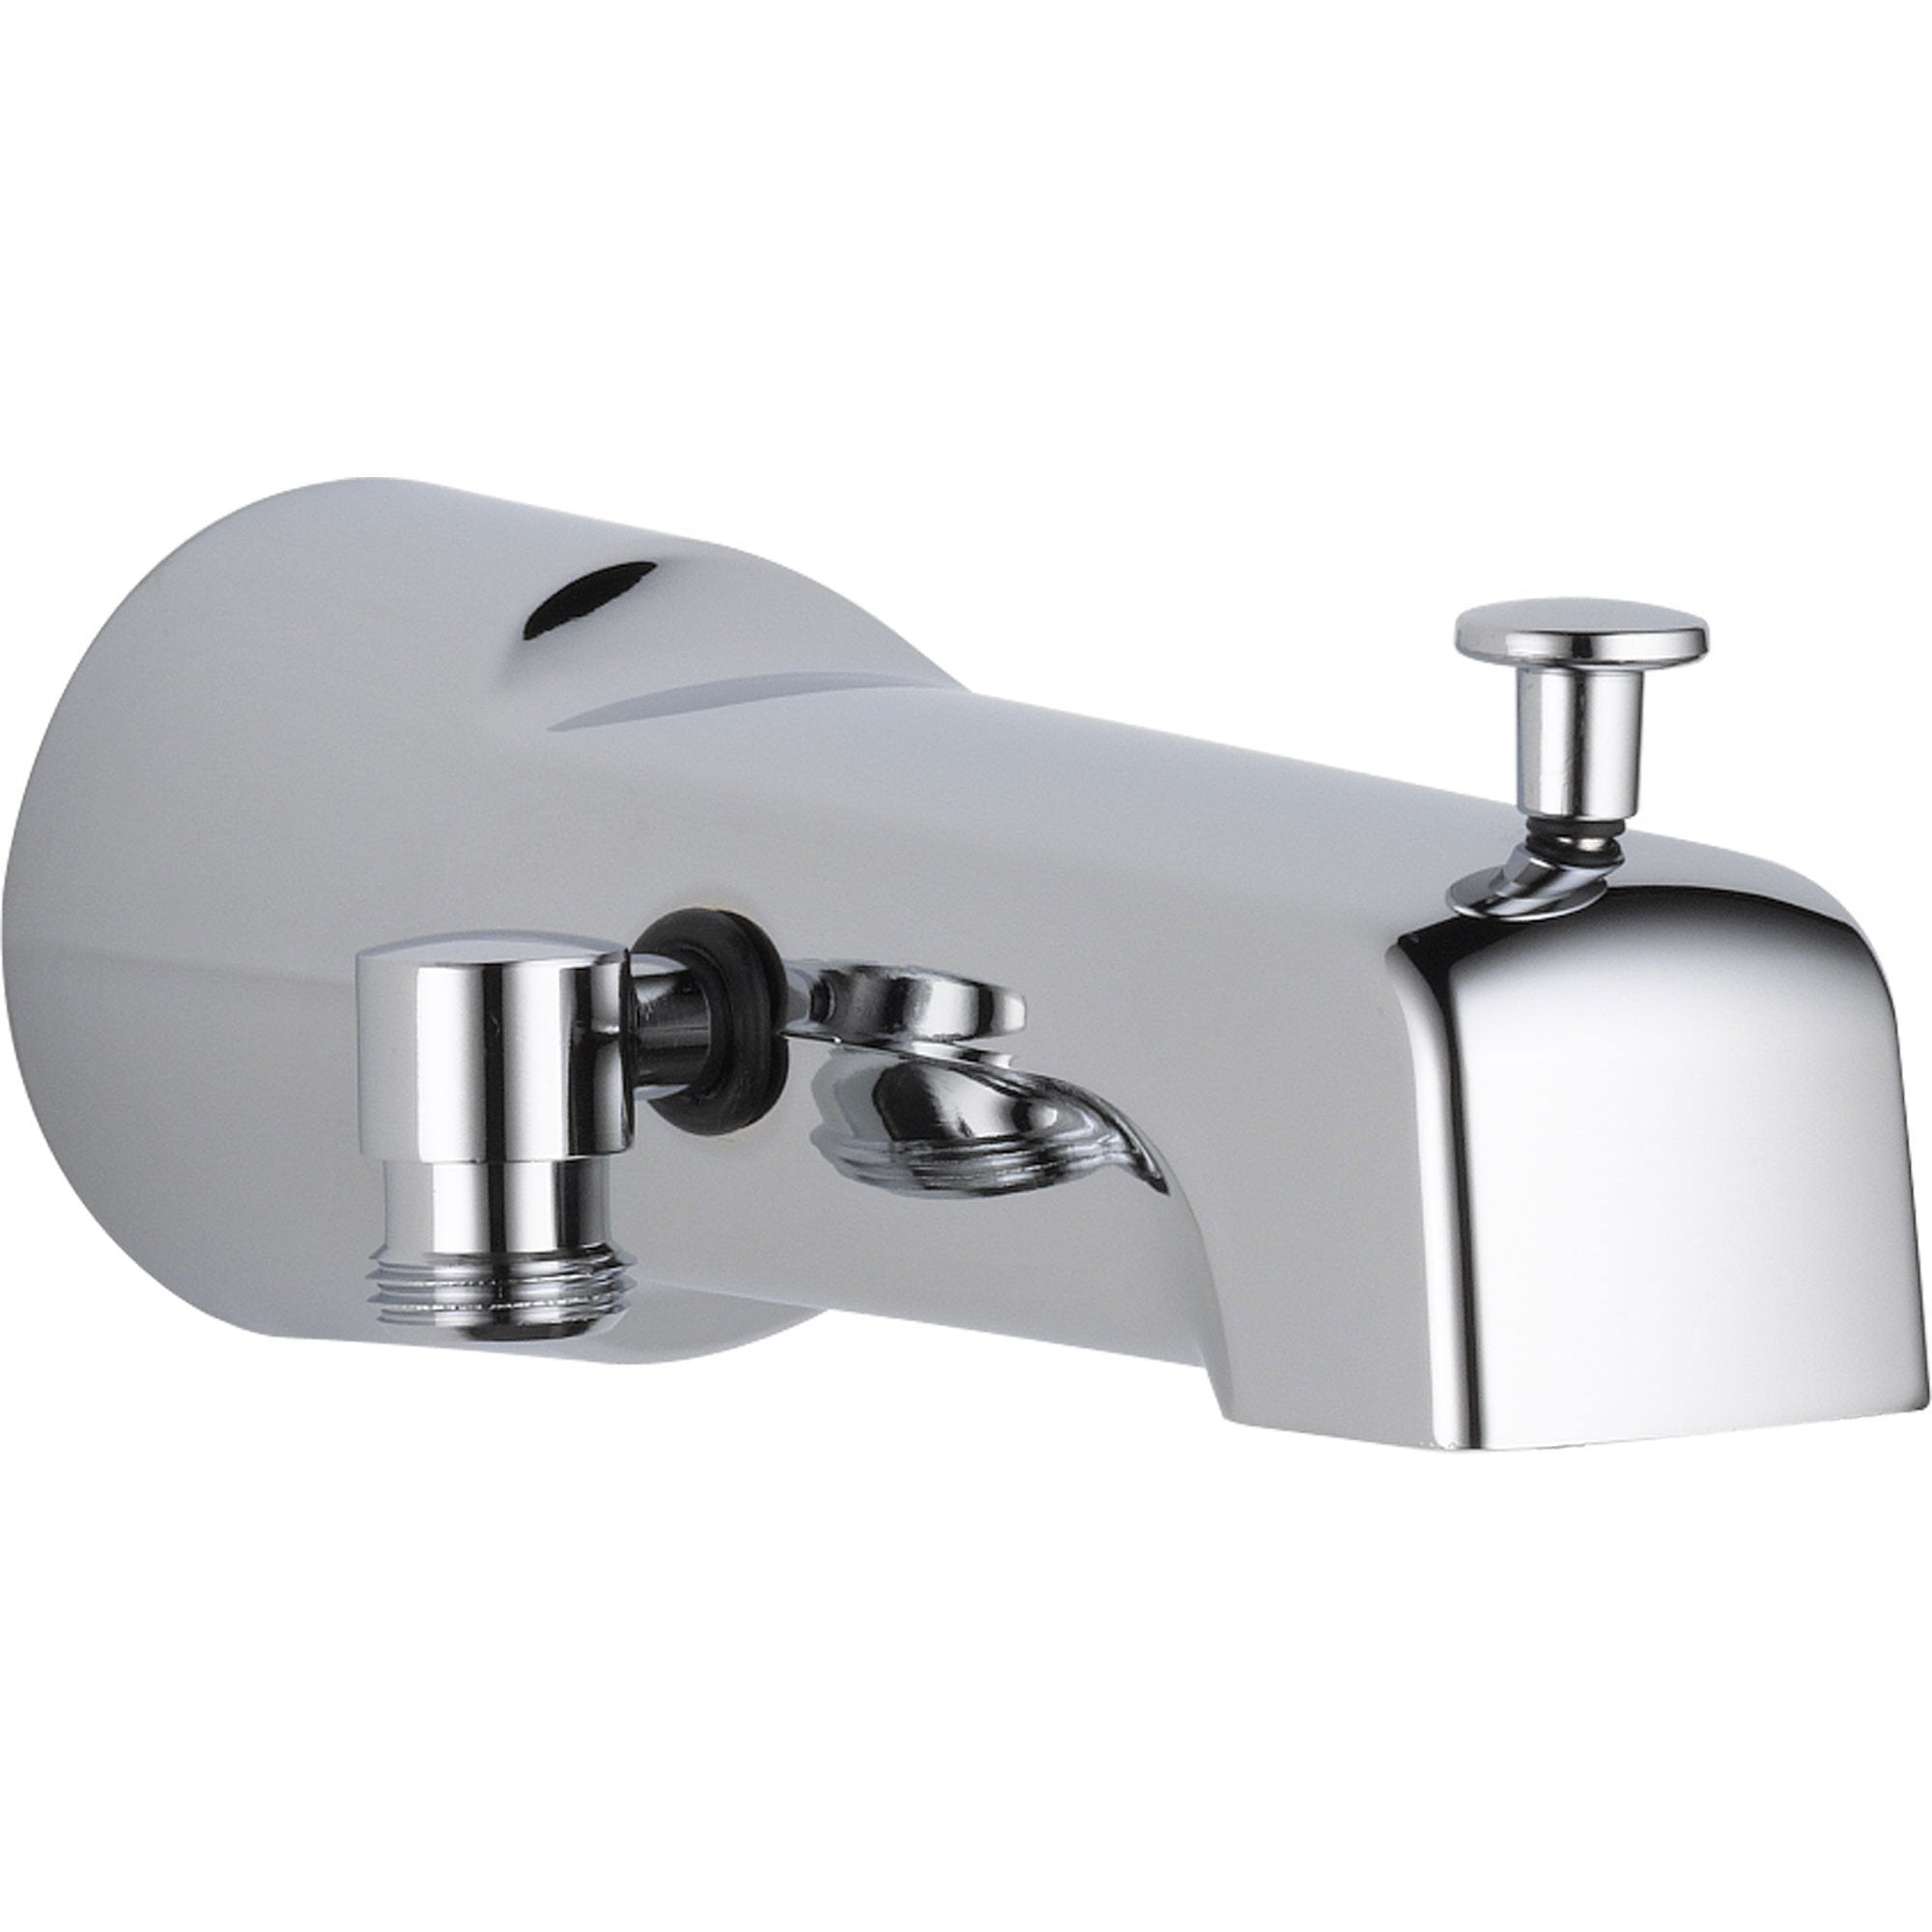 Delta 7.2 In. Long Pull-up Diverter Tub Spout in Chrome 561295